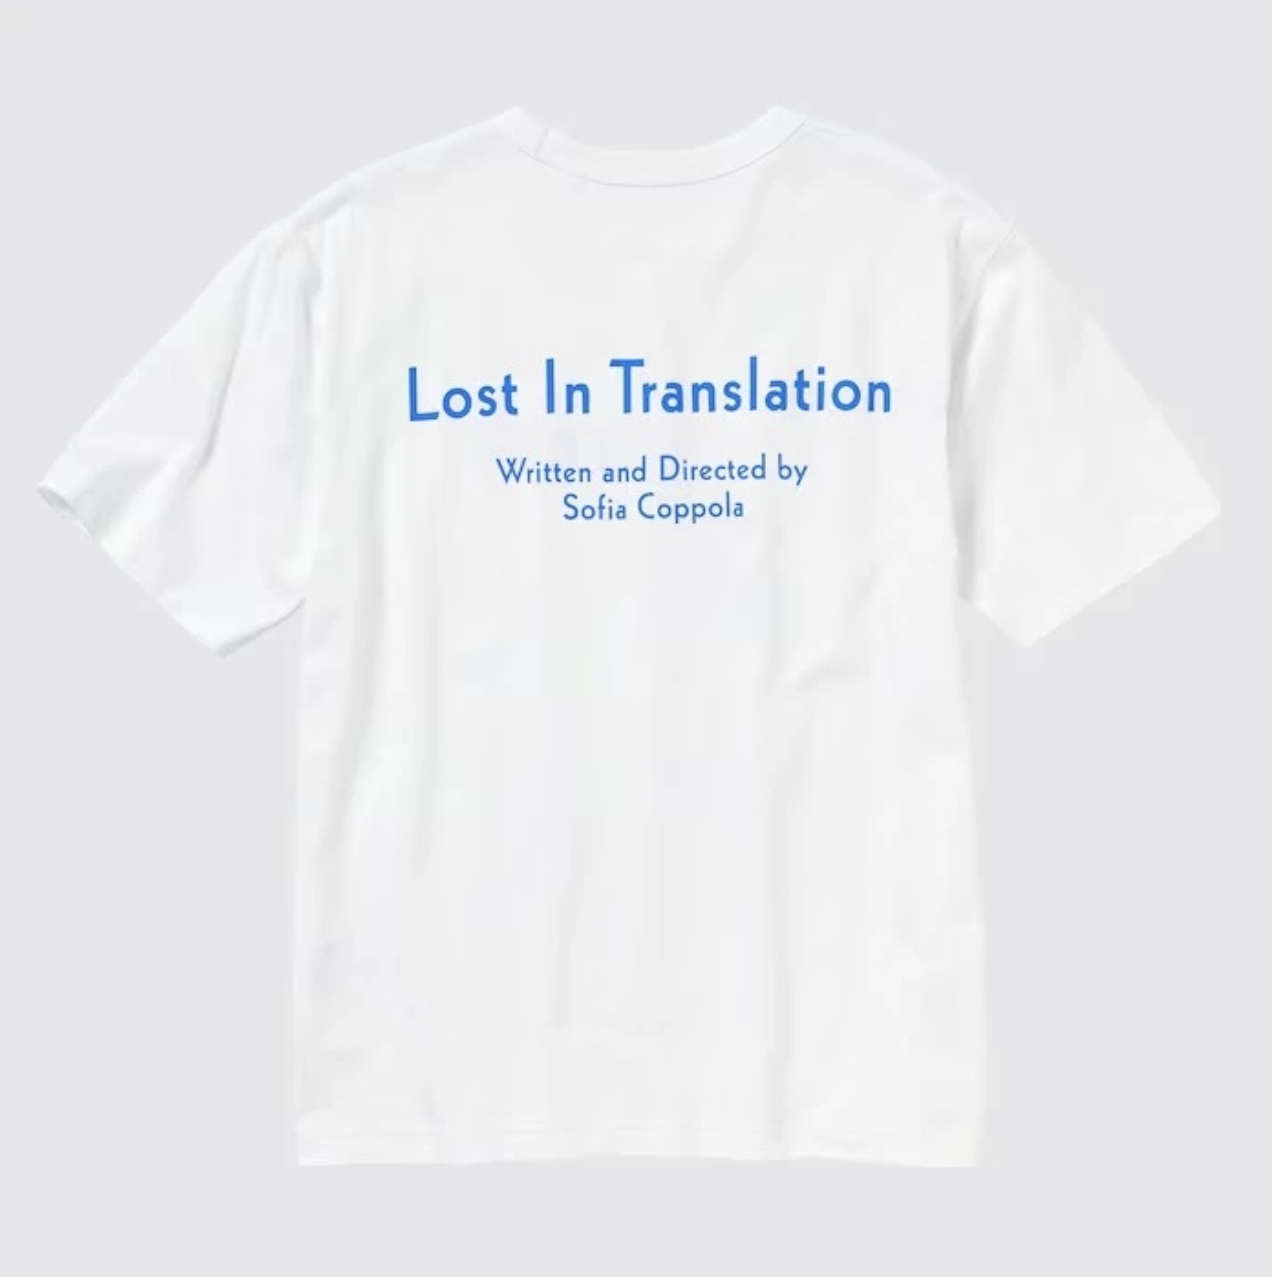 Uniqlo's New T-Shirt Collaboration Features 'Marie Antoinette' and